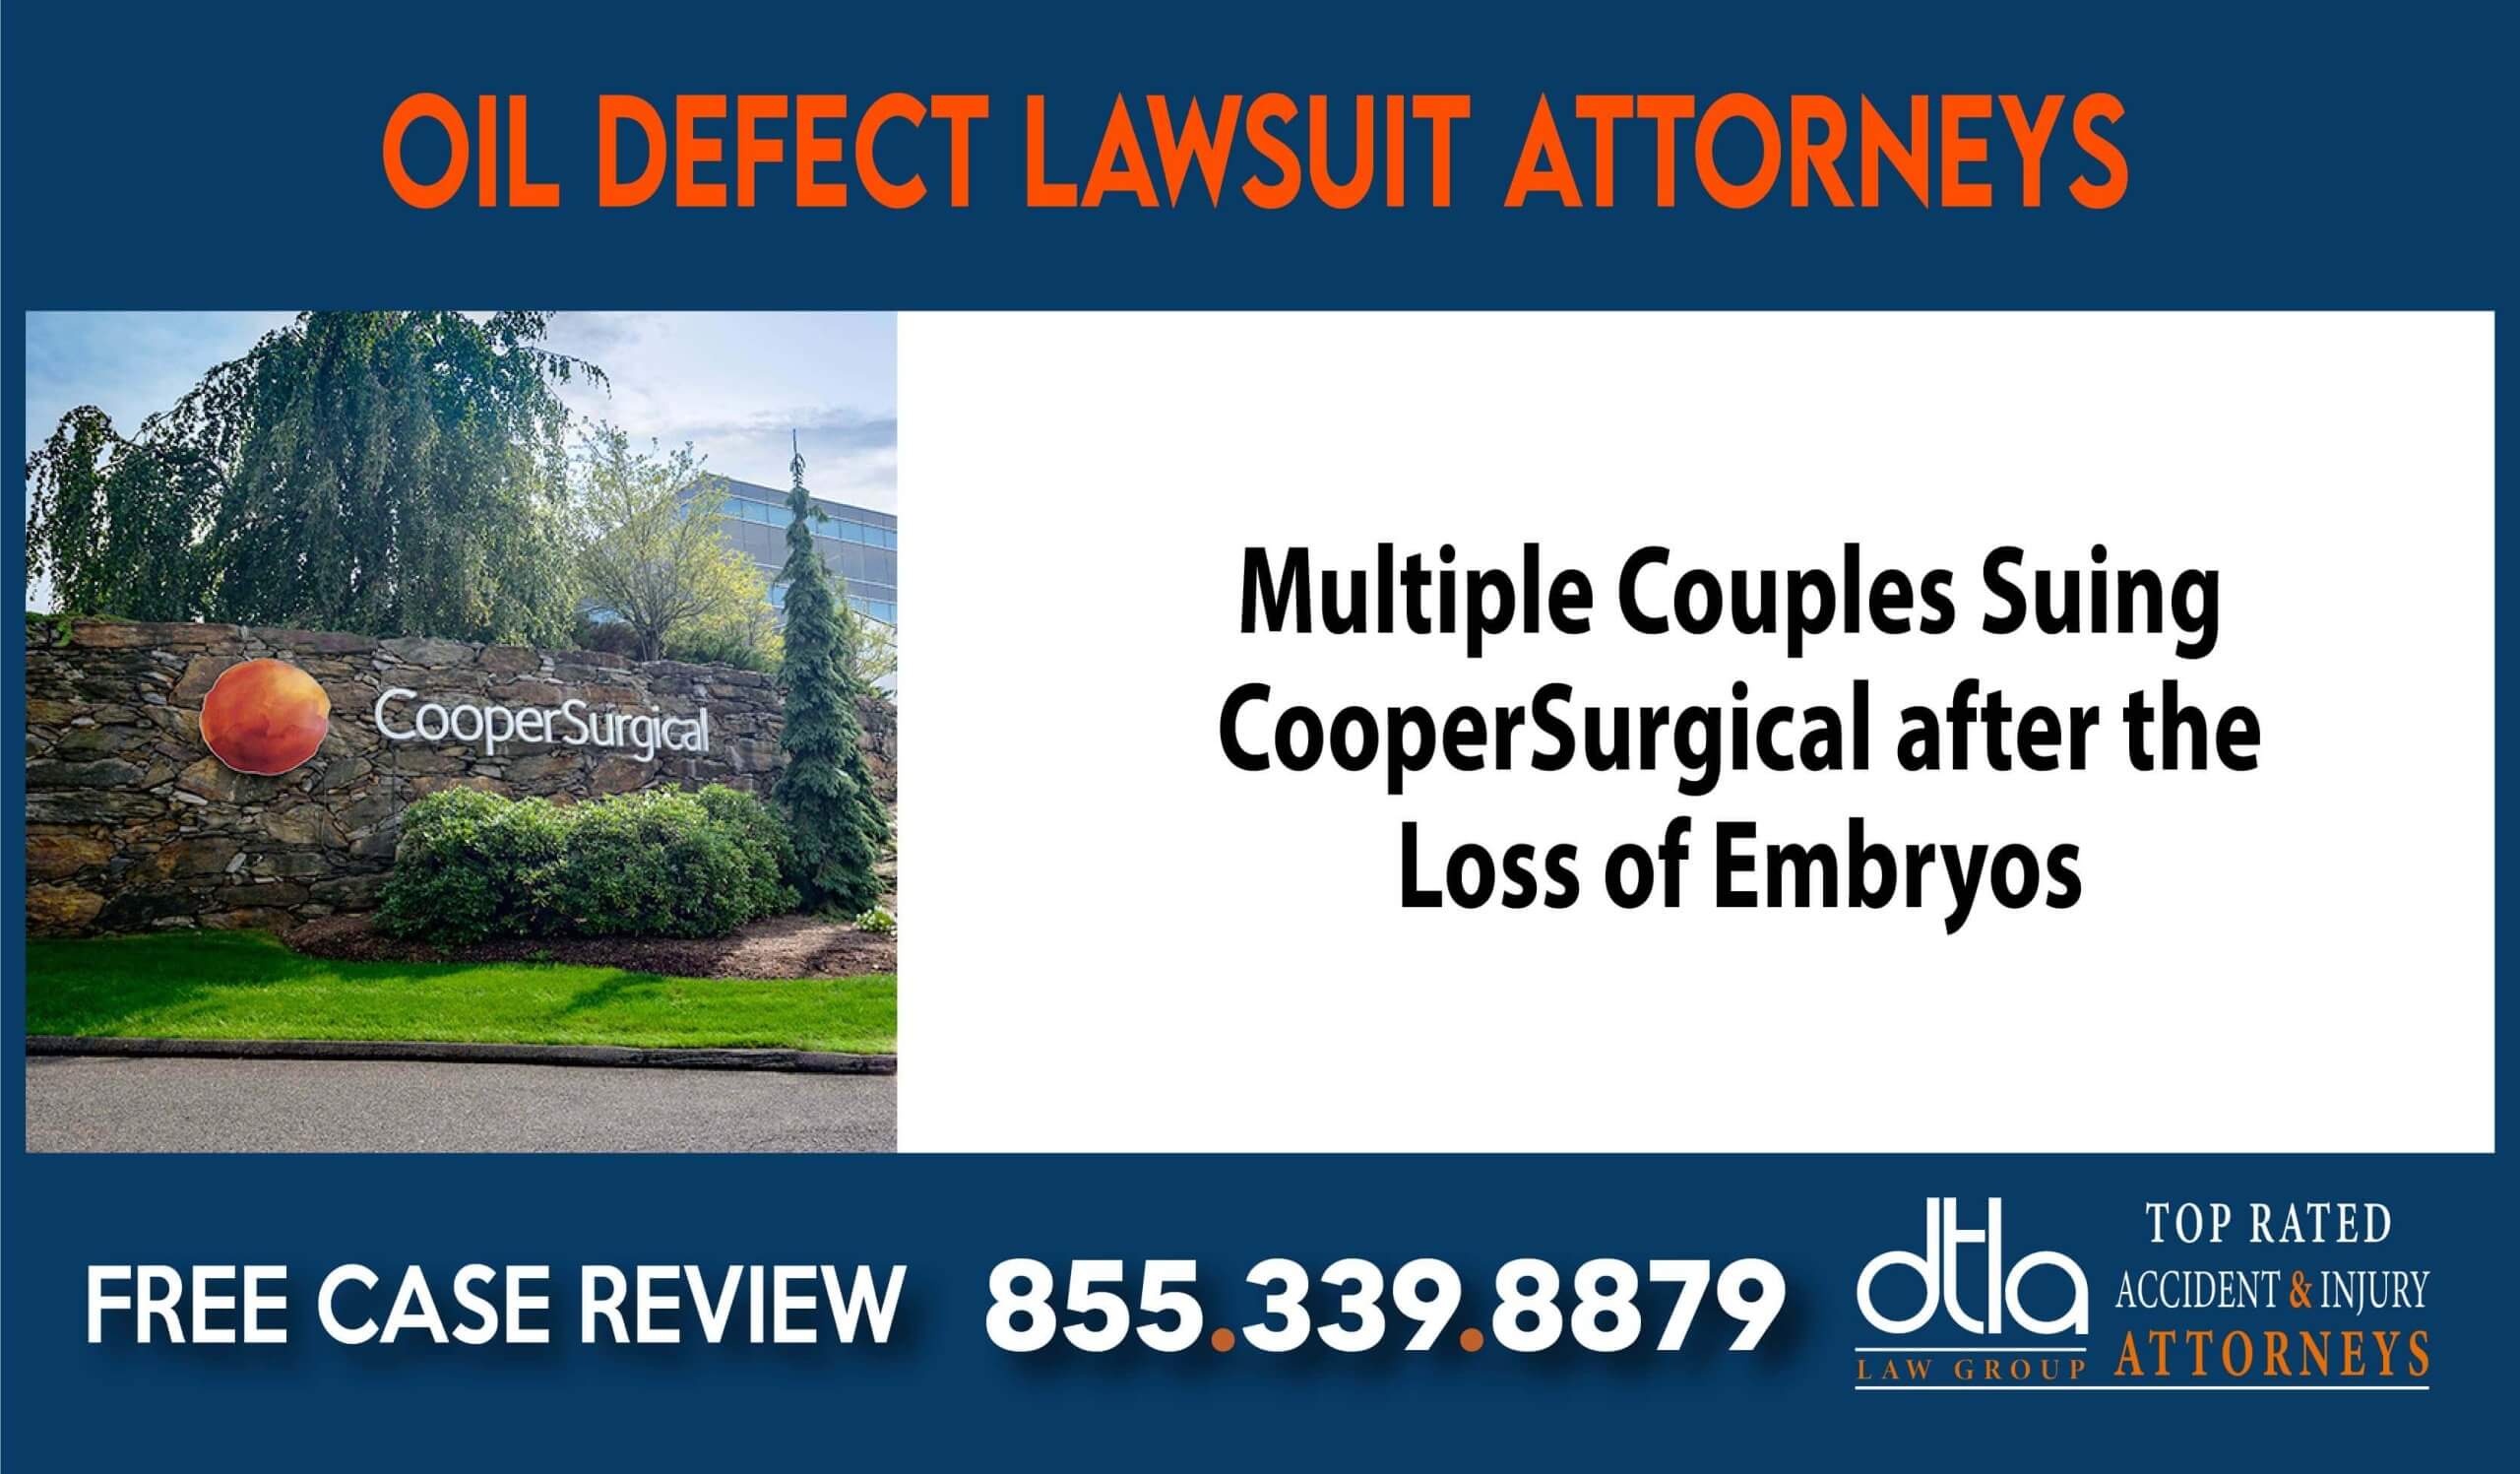 Multiple Couples Suing CooperSurgical after the Loss of Embryos IVF Oil Defect Lawsuit Attorneys